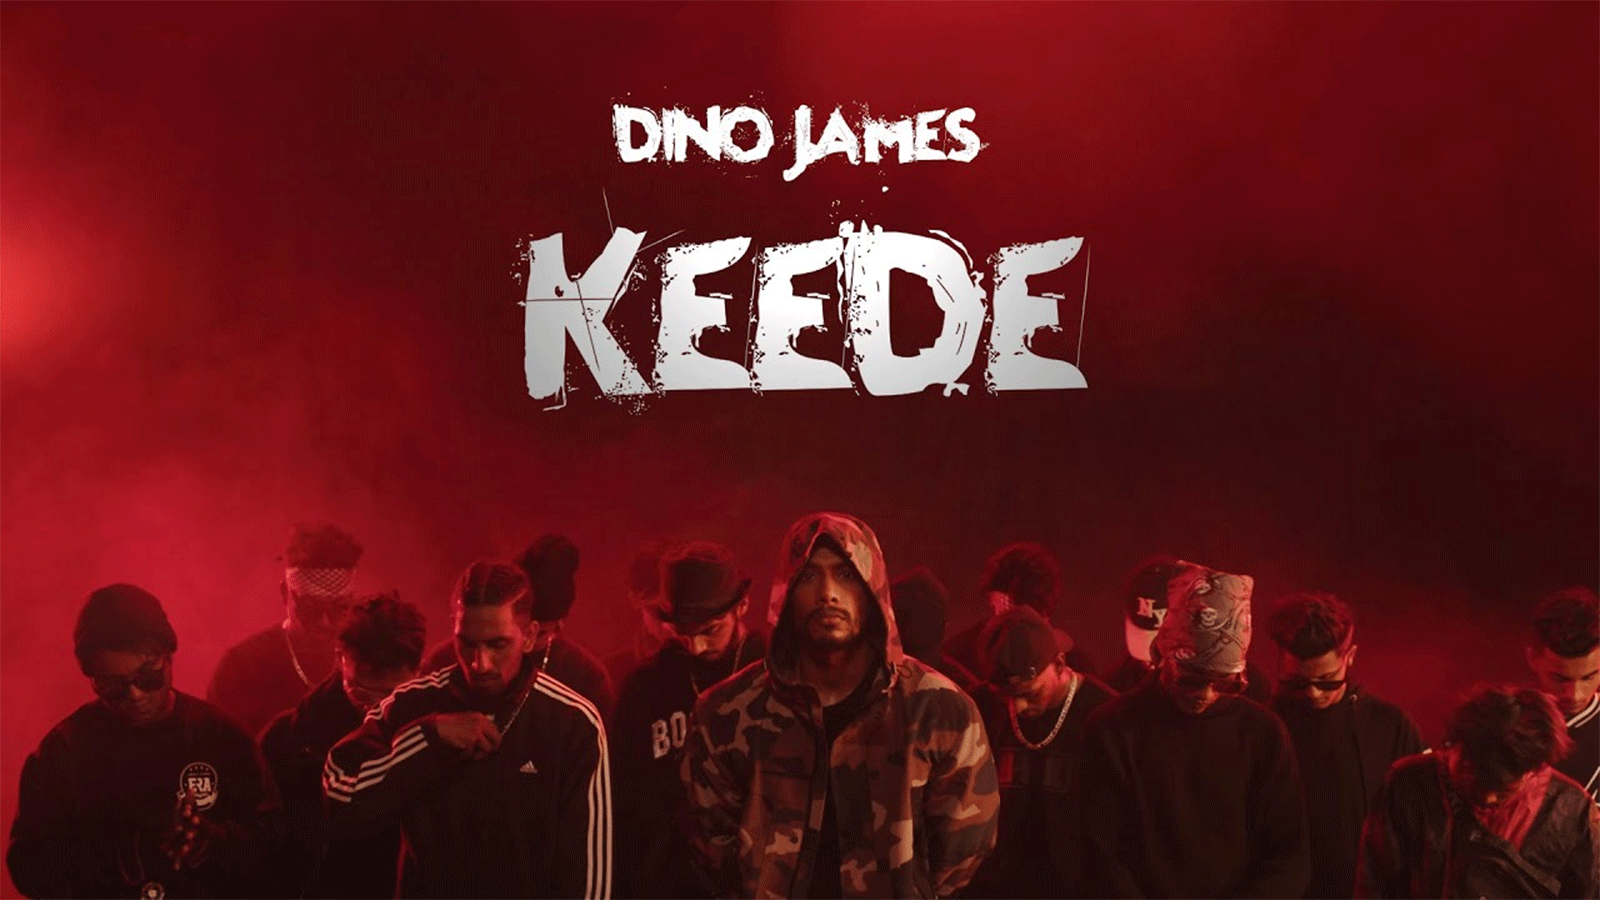 Check Out New Hindi Rap Song Music Video - 'Keede' Sung By Dino James |  Hindi Video Songs - Times of India